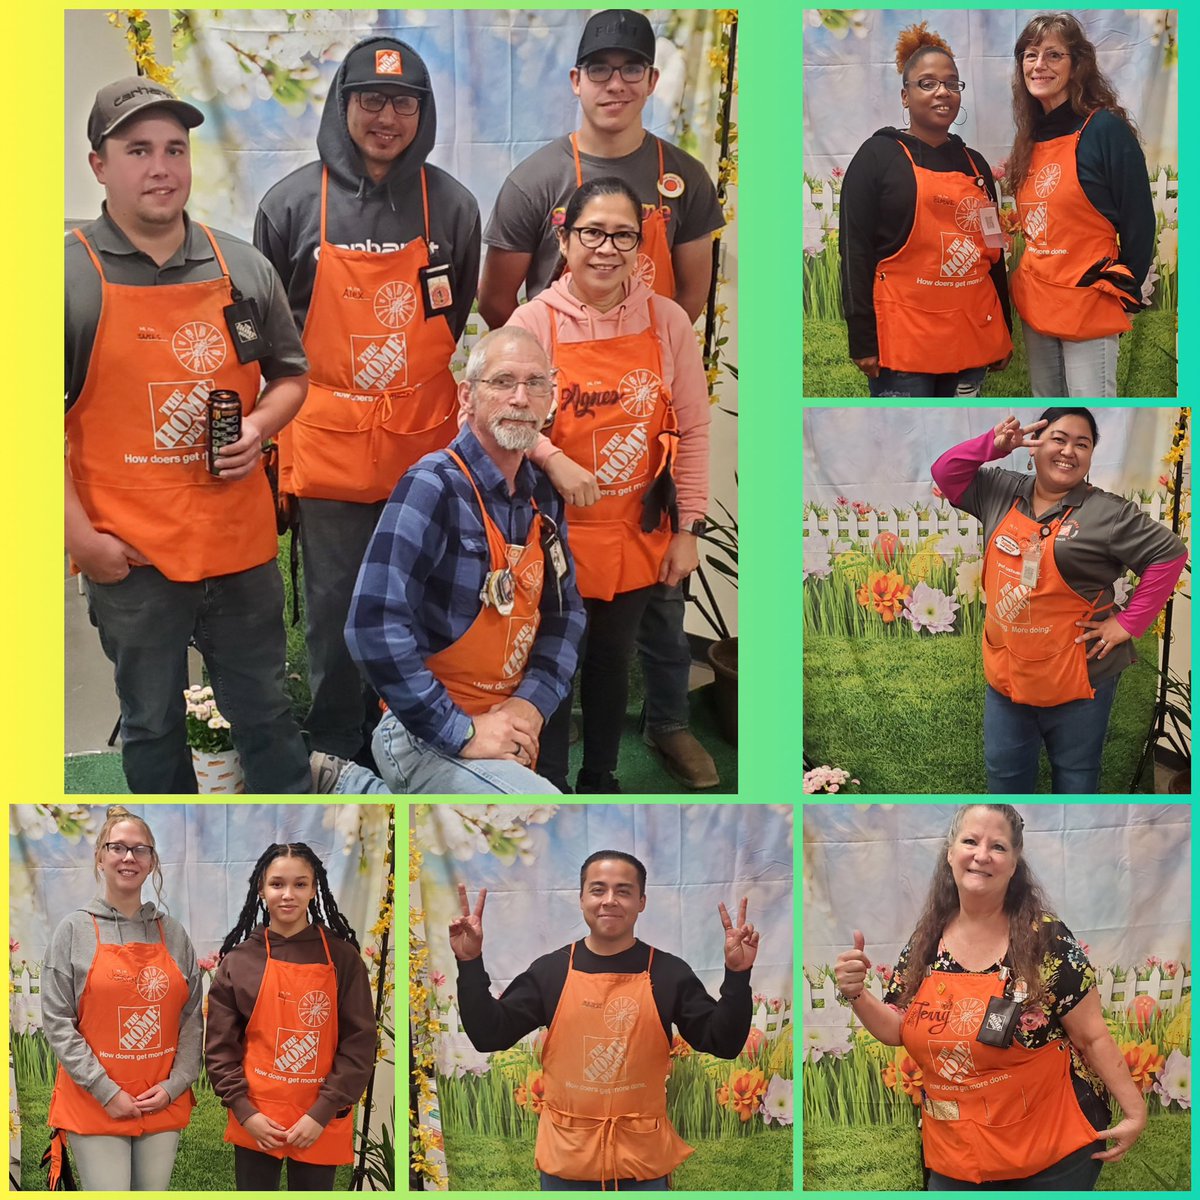 More Spring Fling from #8975Proud I’m so proud of our team and I truly think they enjoyed #SuccessSharing2023 @TaraMartin9_9 @WillHomeDepot @itsl331 @intuitivejoel